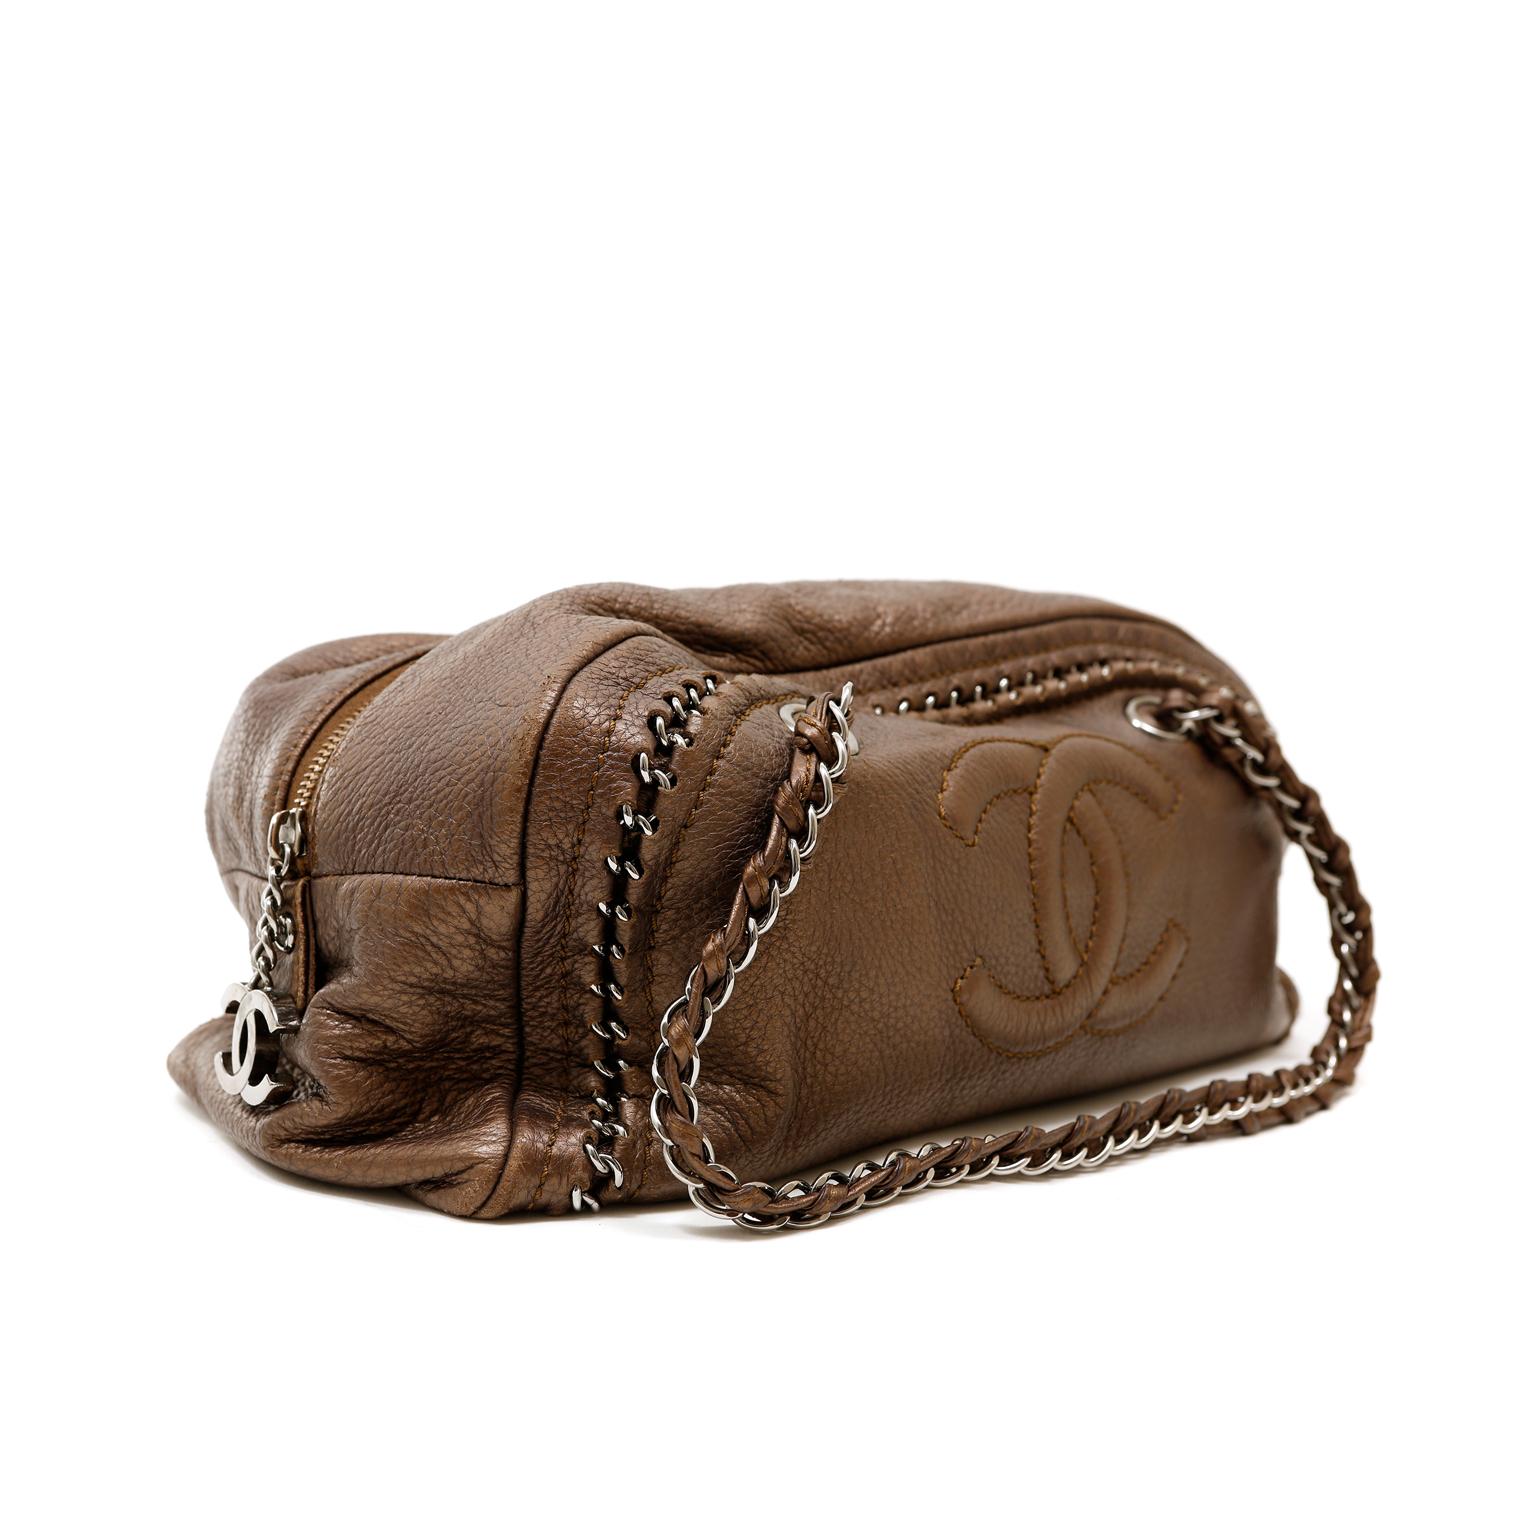 This authentic Chanel Bronze Luxe Ligne Bowler Bag is in excellent condition from the 2006 collection.  Perfectly scaled for every day enjoyment, the neutral color and exposed chain details make this Chanel a chic companion.
Subtle metallic bronzy